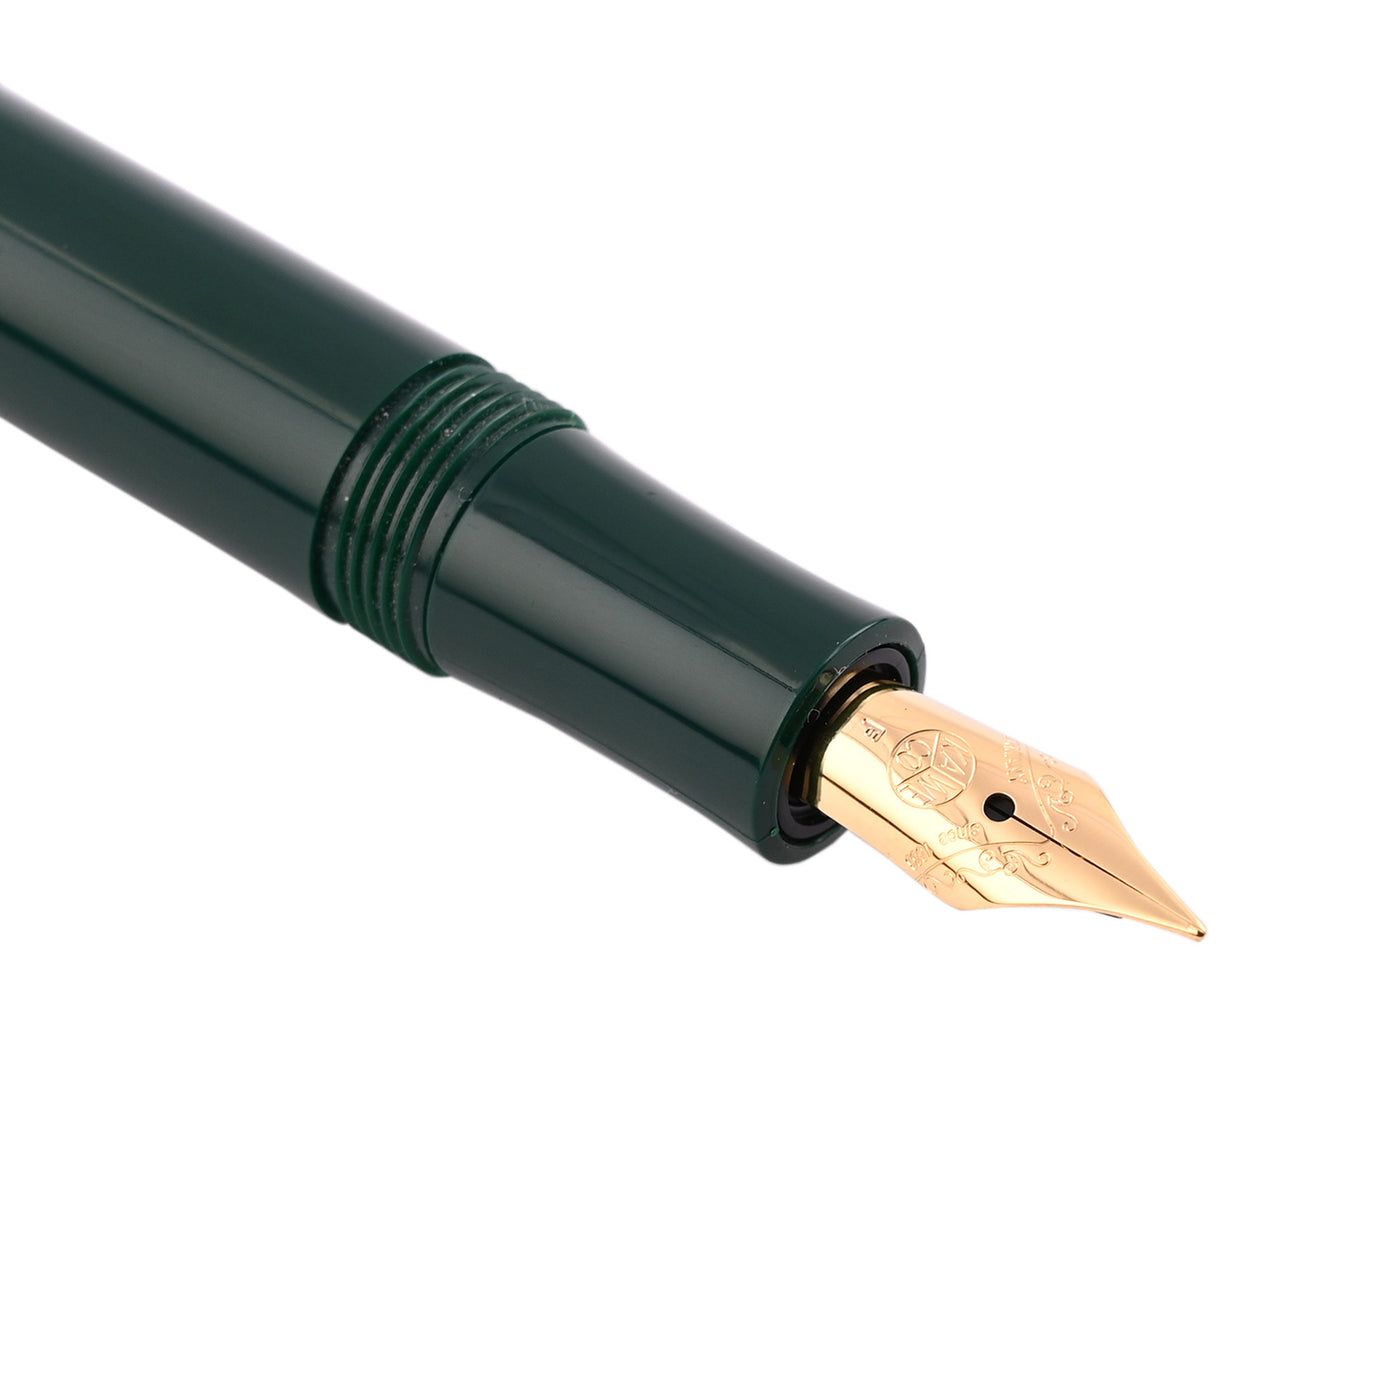 Kaweco Classic Sport Fountain Pen with Optional Clip - Green 2